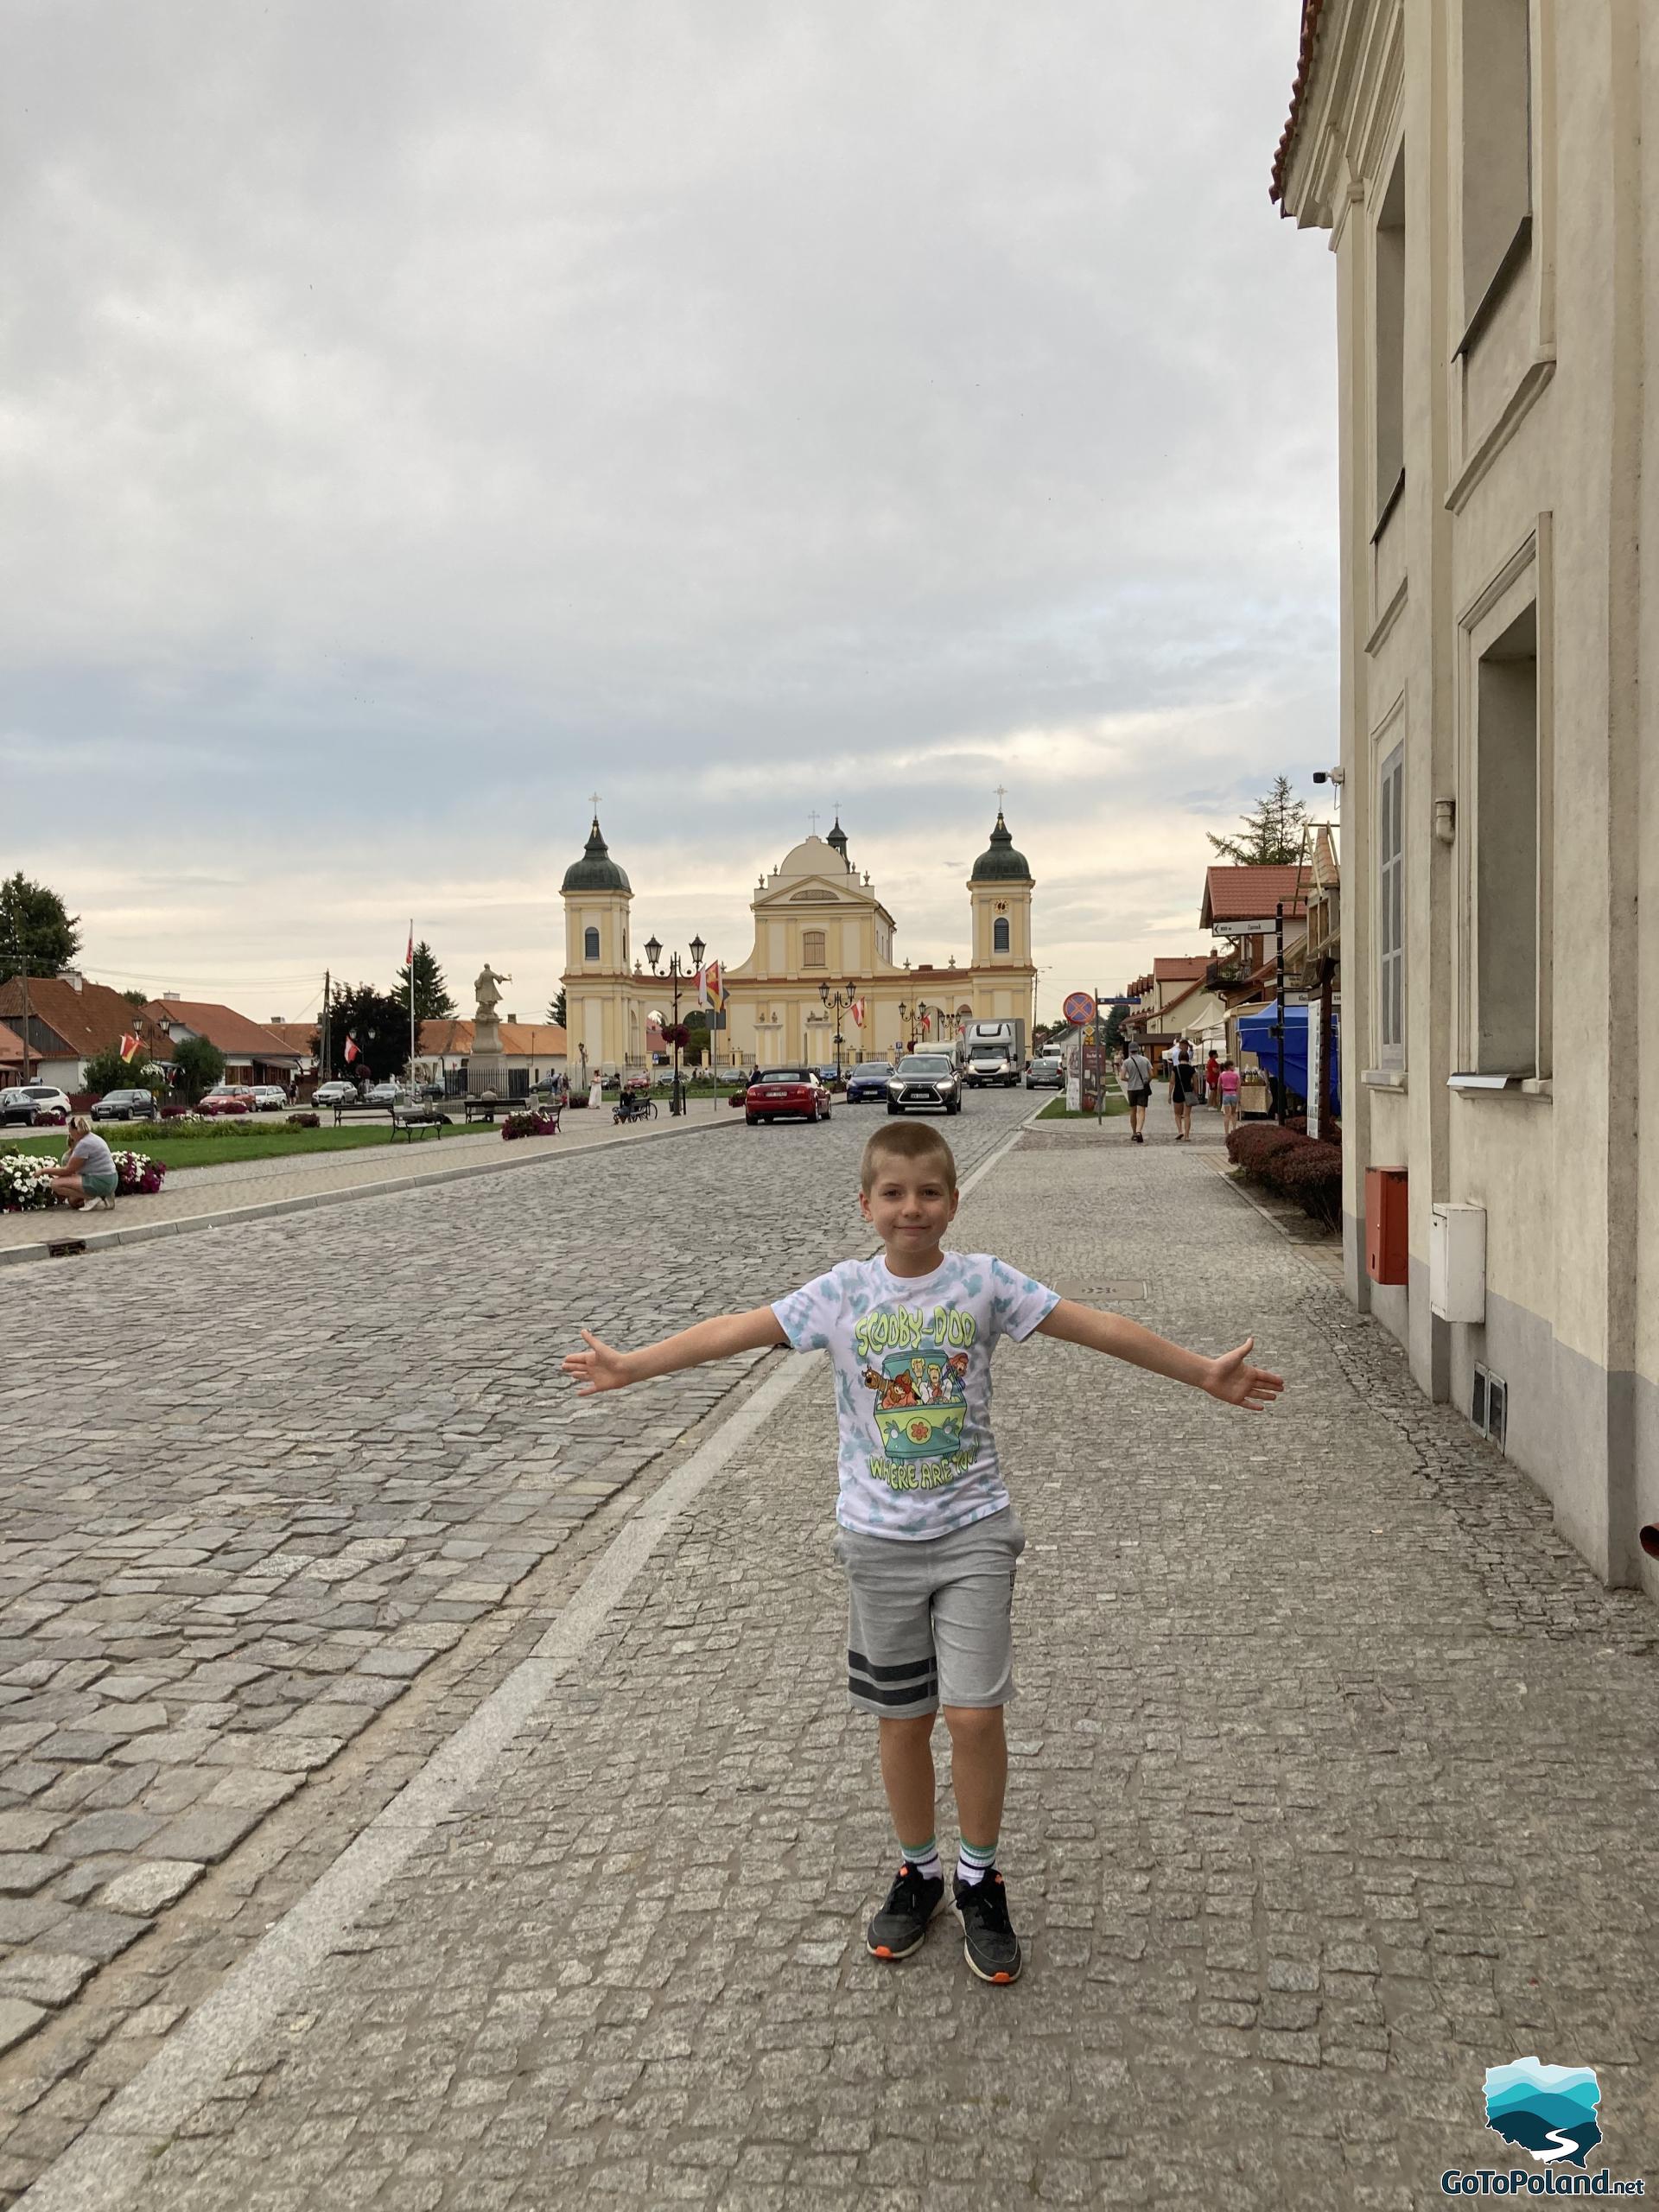 the boy is standing on the pavement, behind him the market square in the town and the yellow church in the background